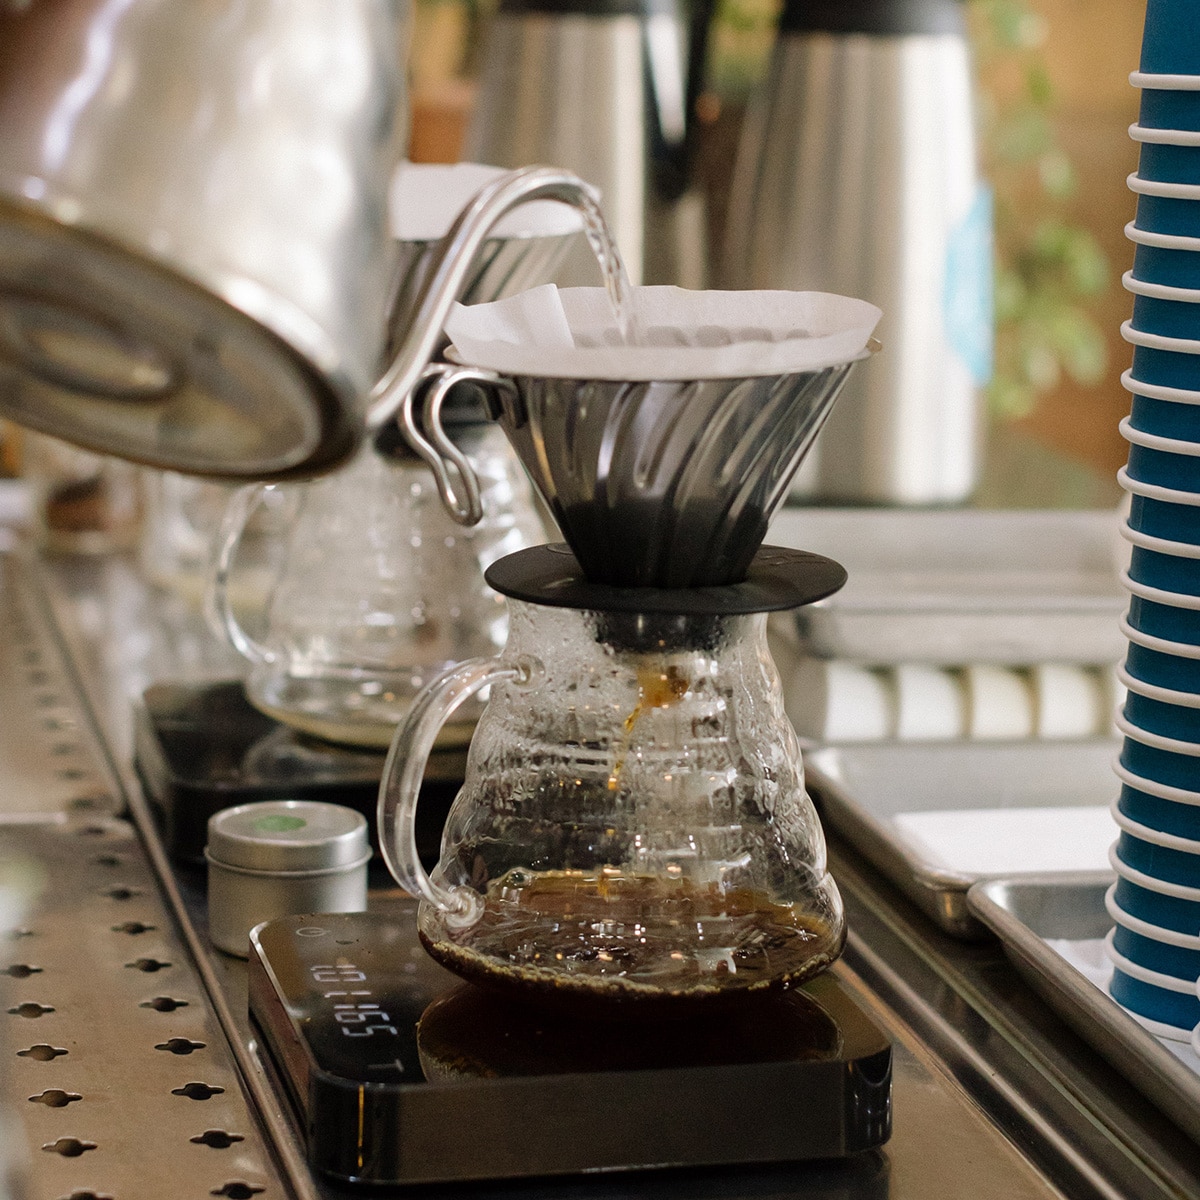 The Brewing Basics training from Blueprint Coffee introduces immersion and percolation methods of brewing coffee.